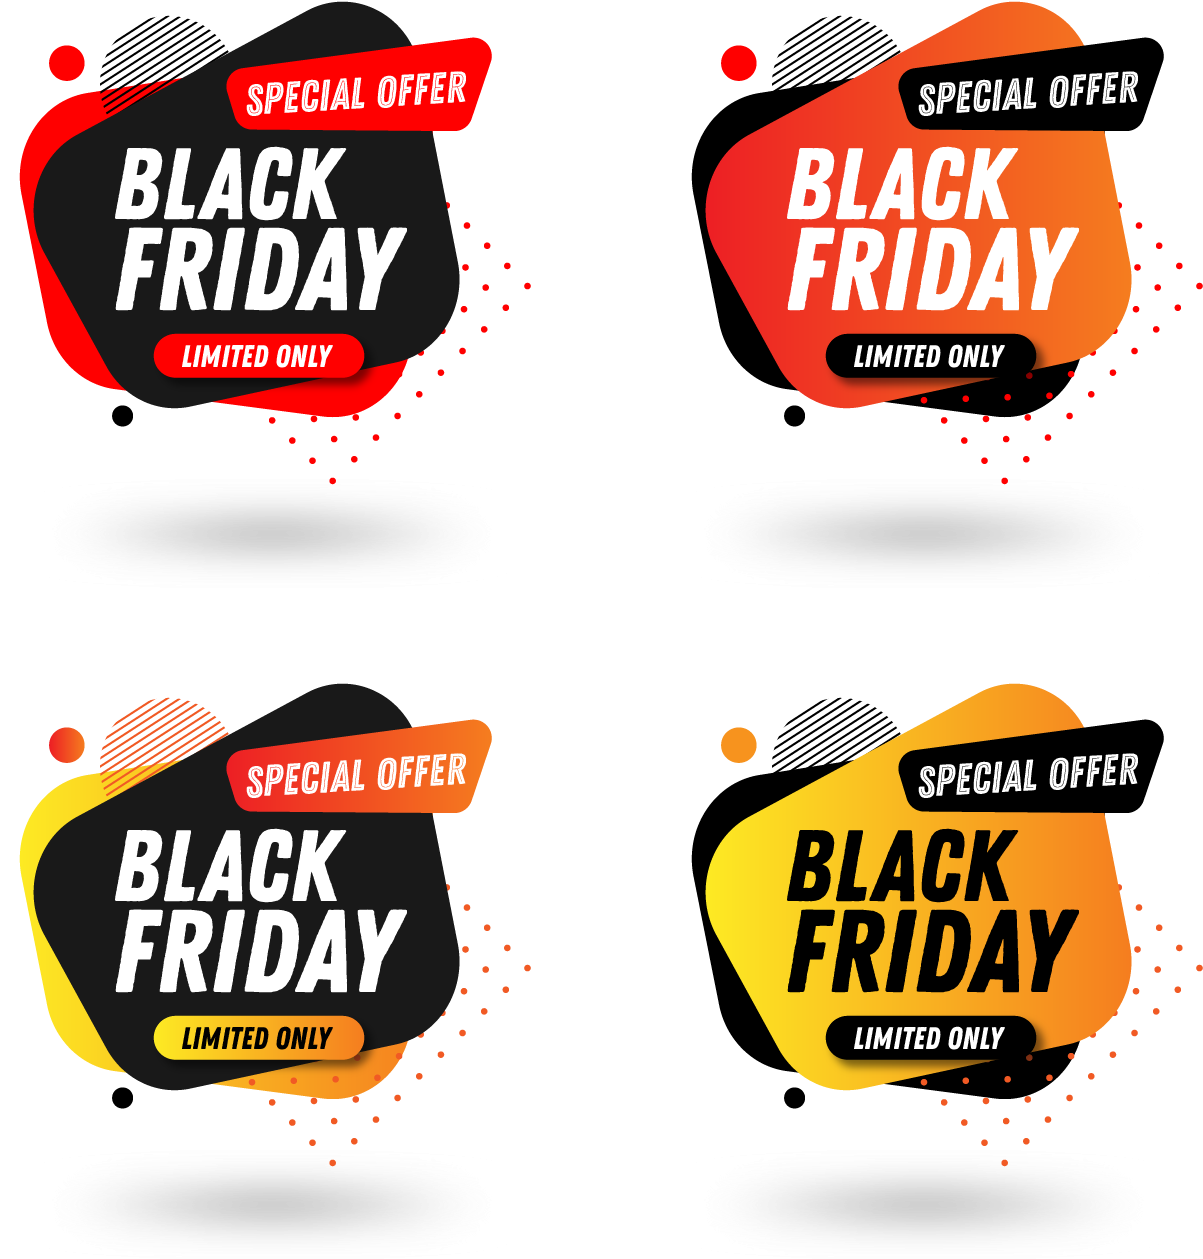 Black Friday Special Offer Banners PNG